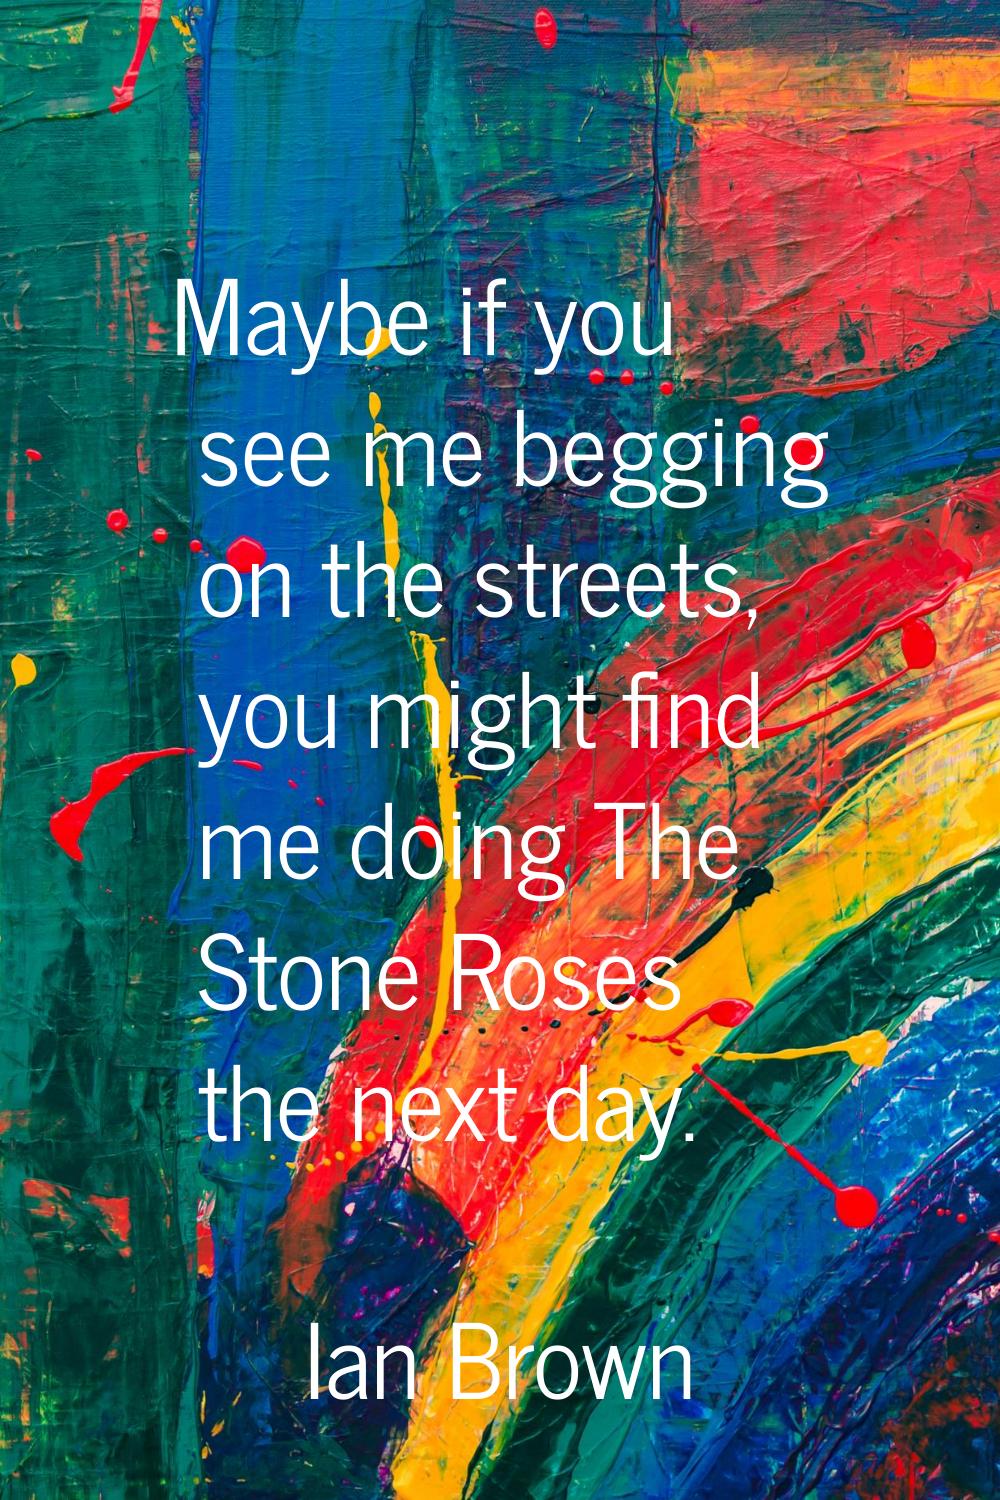 Maybe if you see me begging on the streets, you might find me doing The Stone Roses the next day.